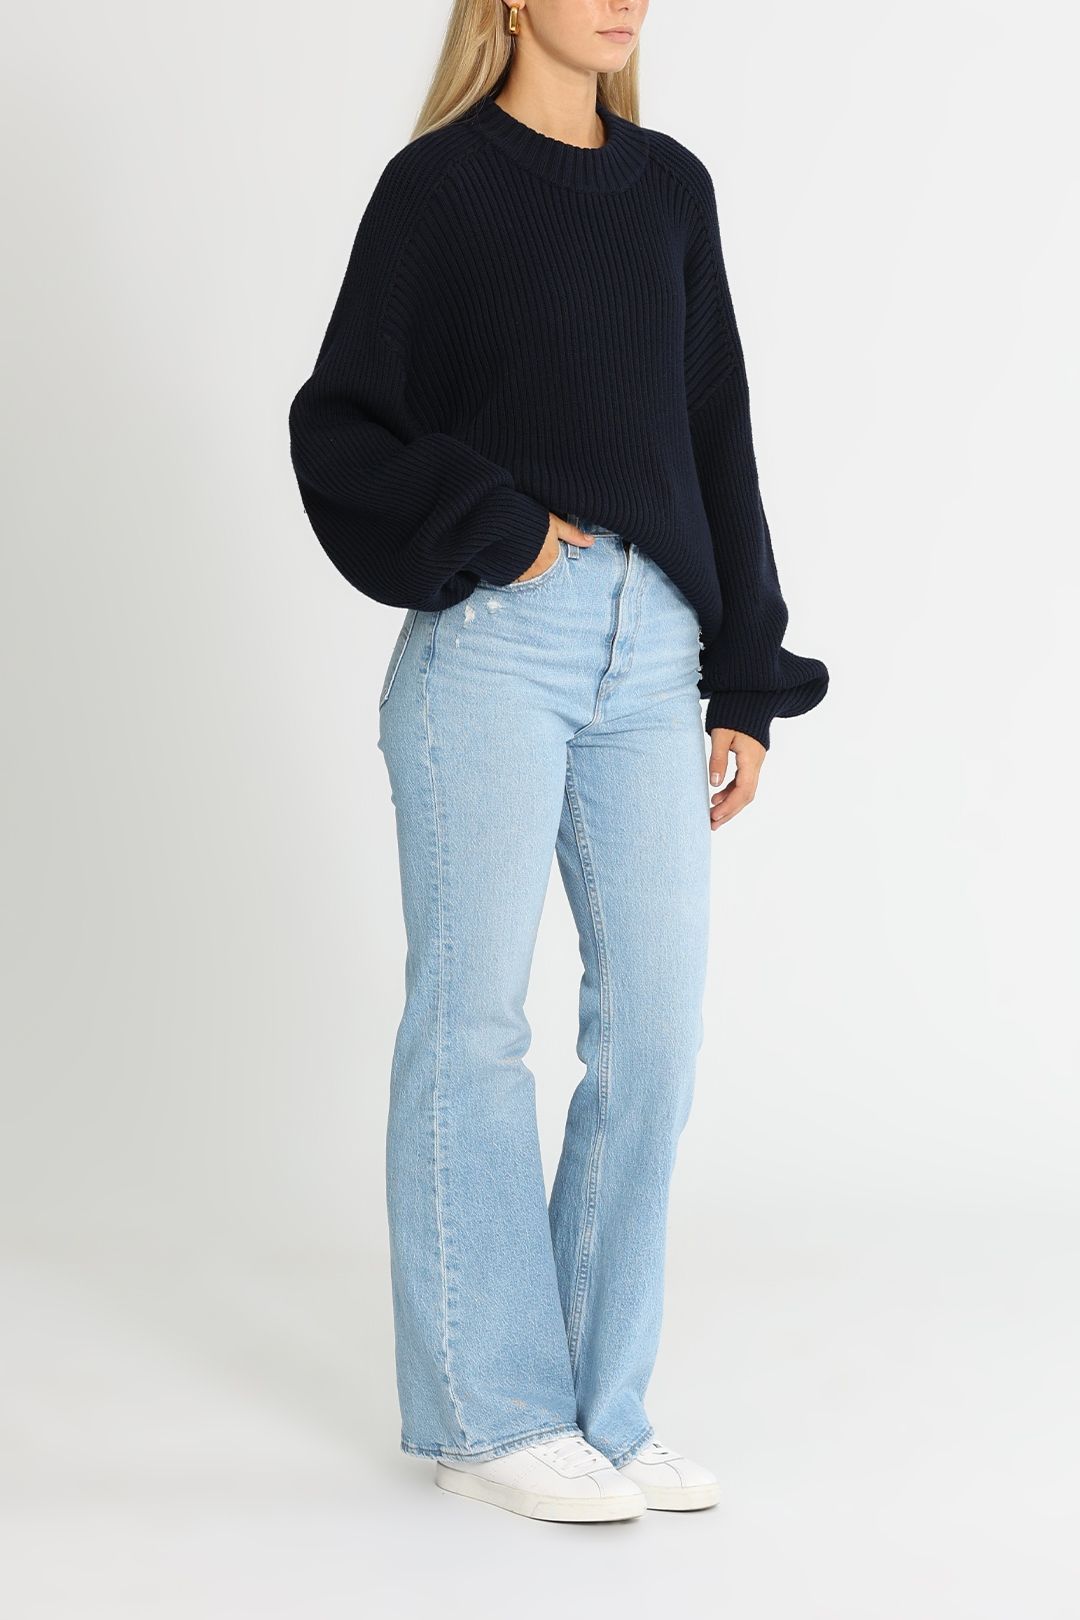 C&M Camilla And Marc Ray Knit Crew Long Sleeves